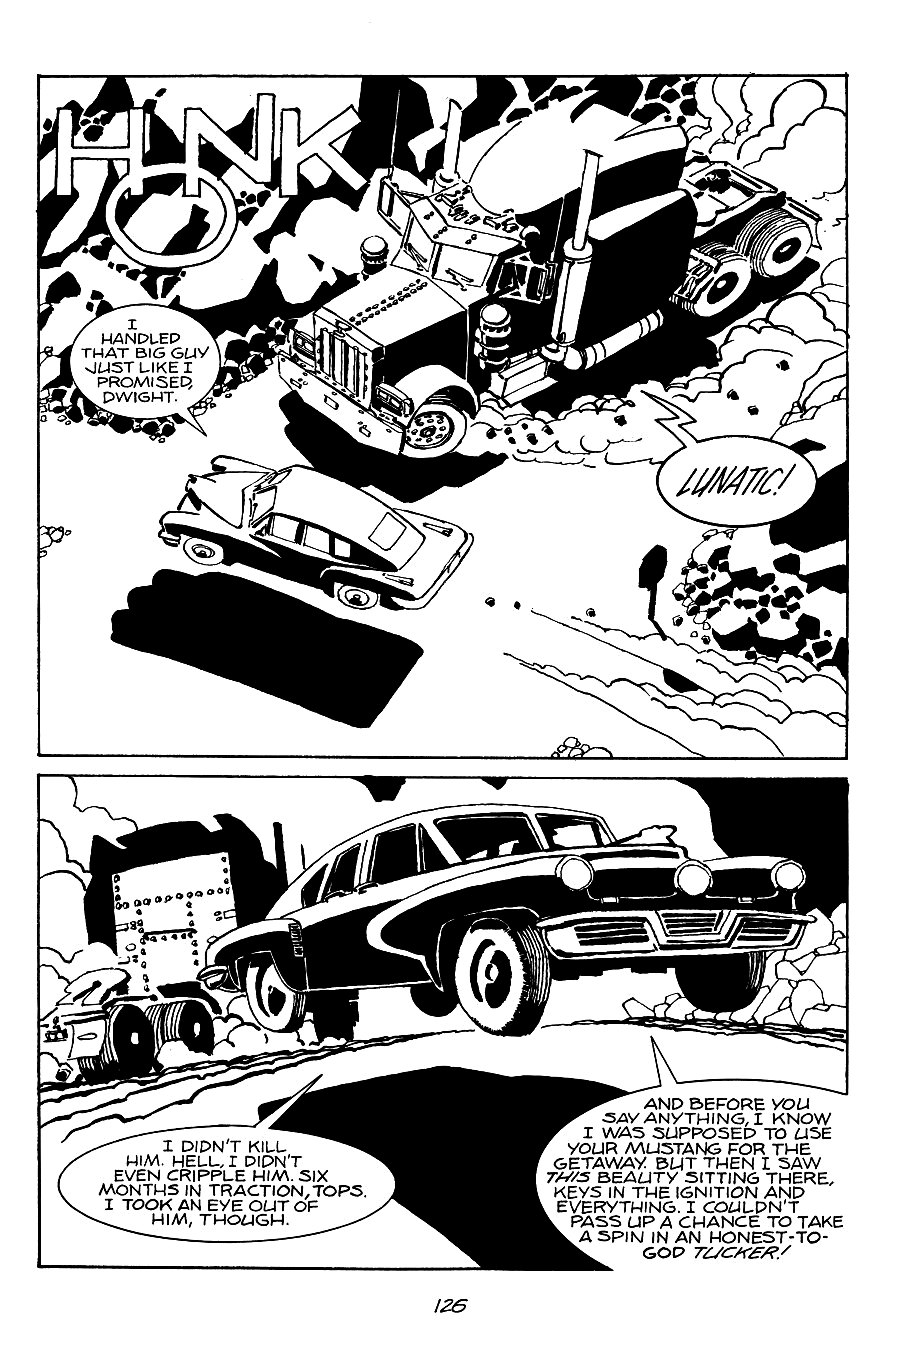 page 126 of sin city 2 the hard goodbye